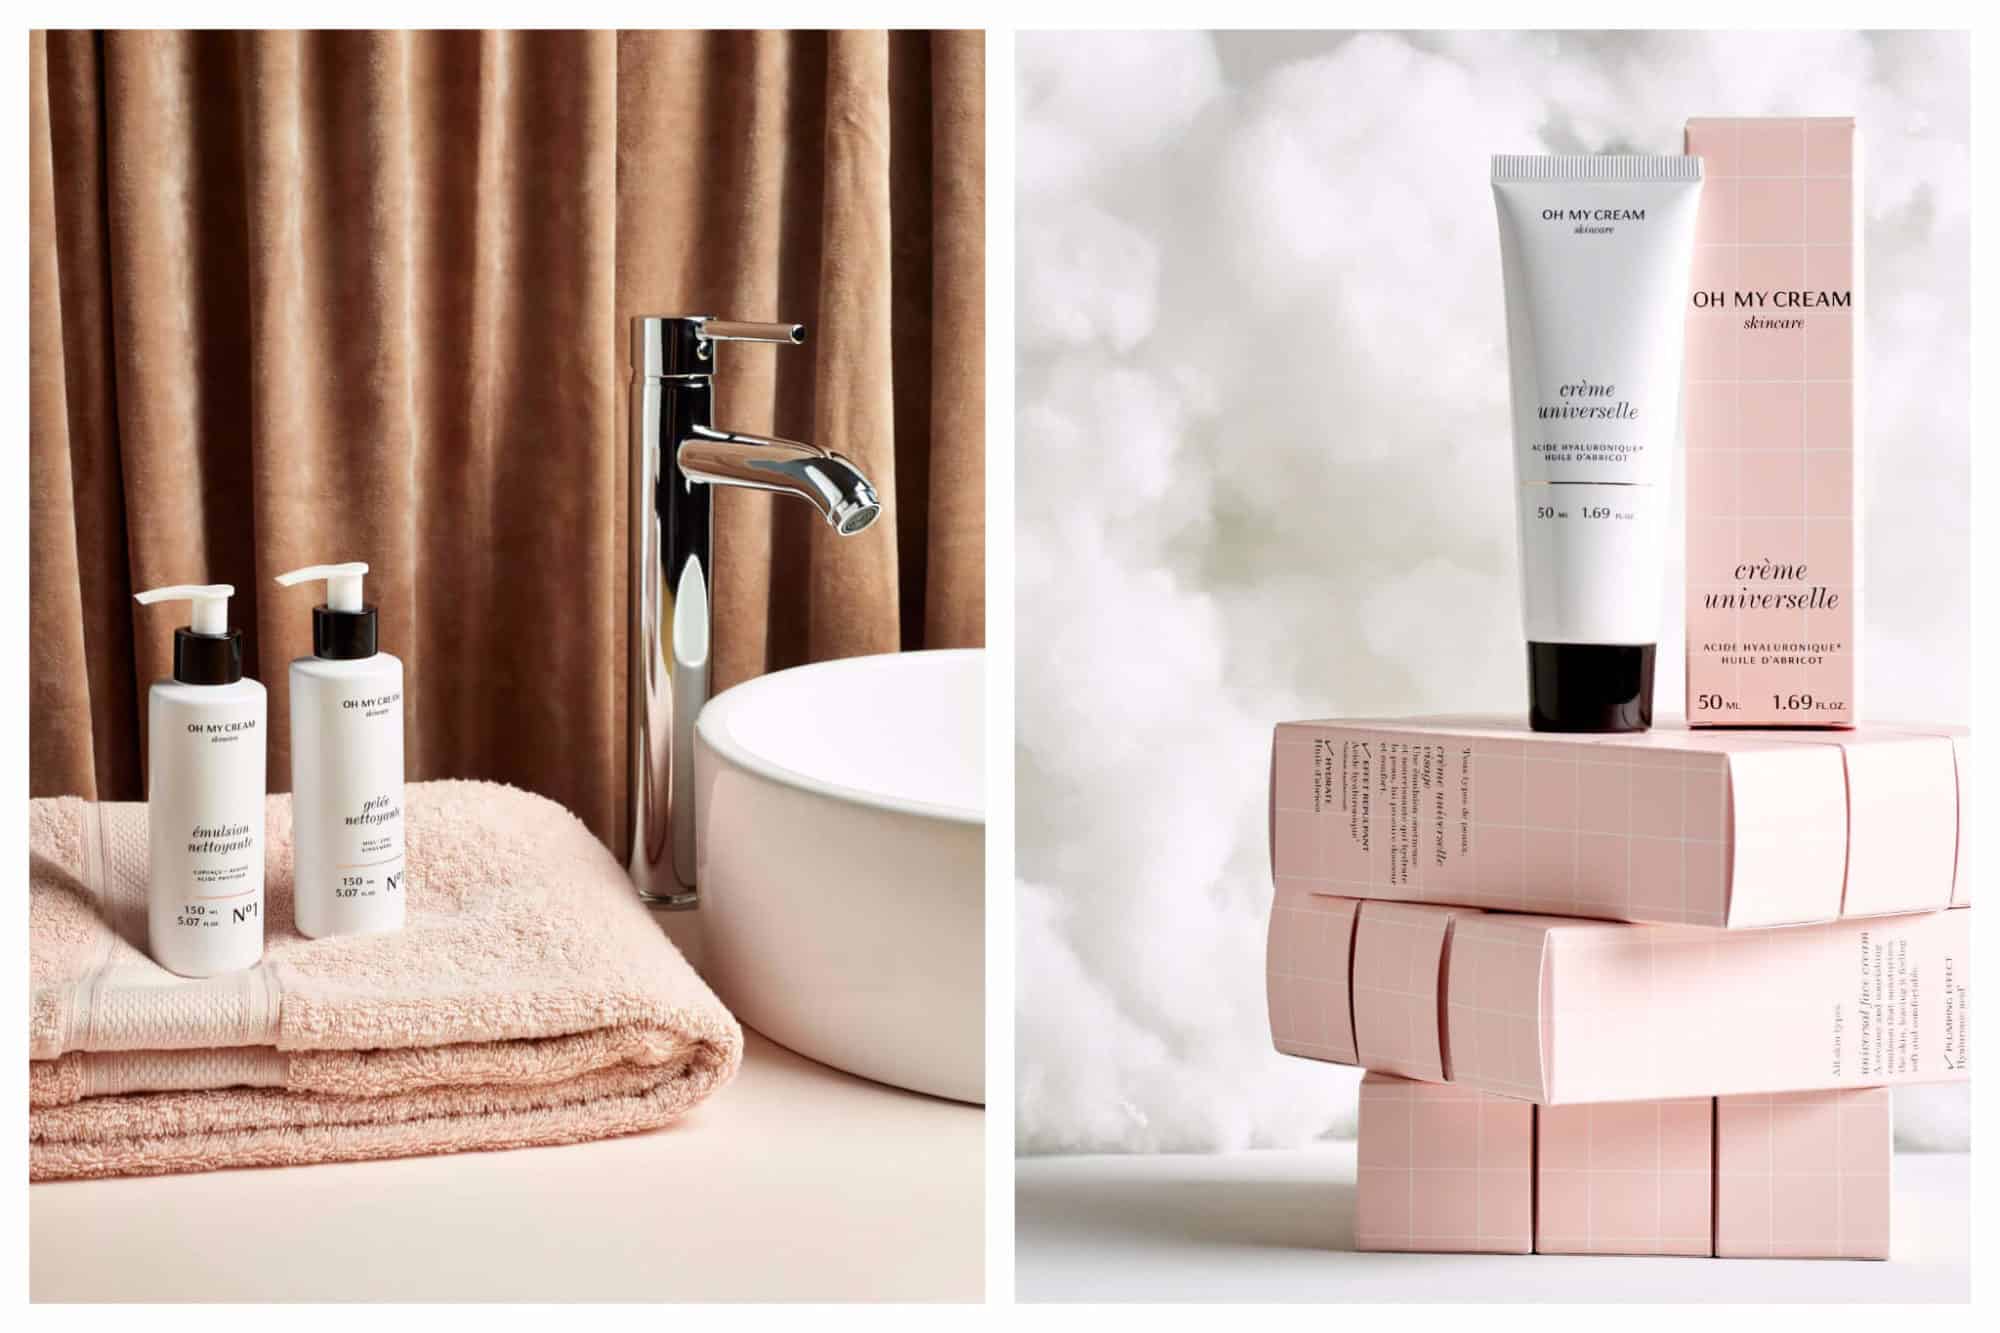 Left, two bottles of cream on a towel in a bathroom from Oh My Cream! brand in Paris. Right, stacked pink and while creams by Parisian brand to shop from home.